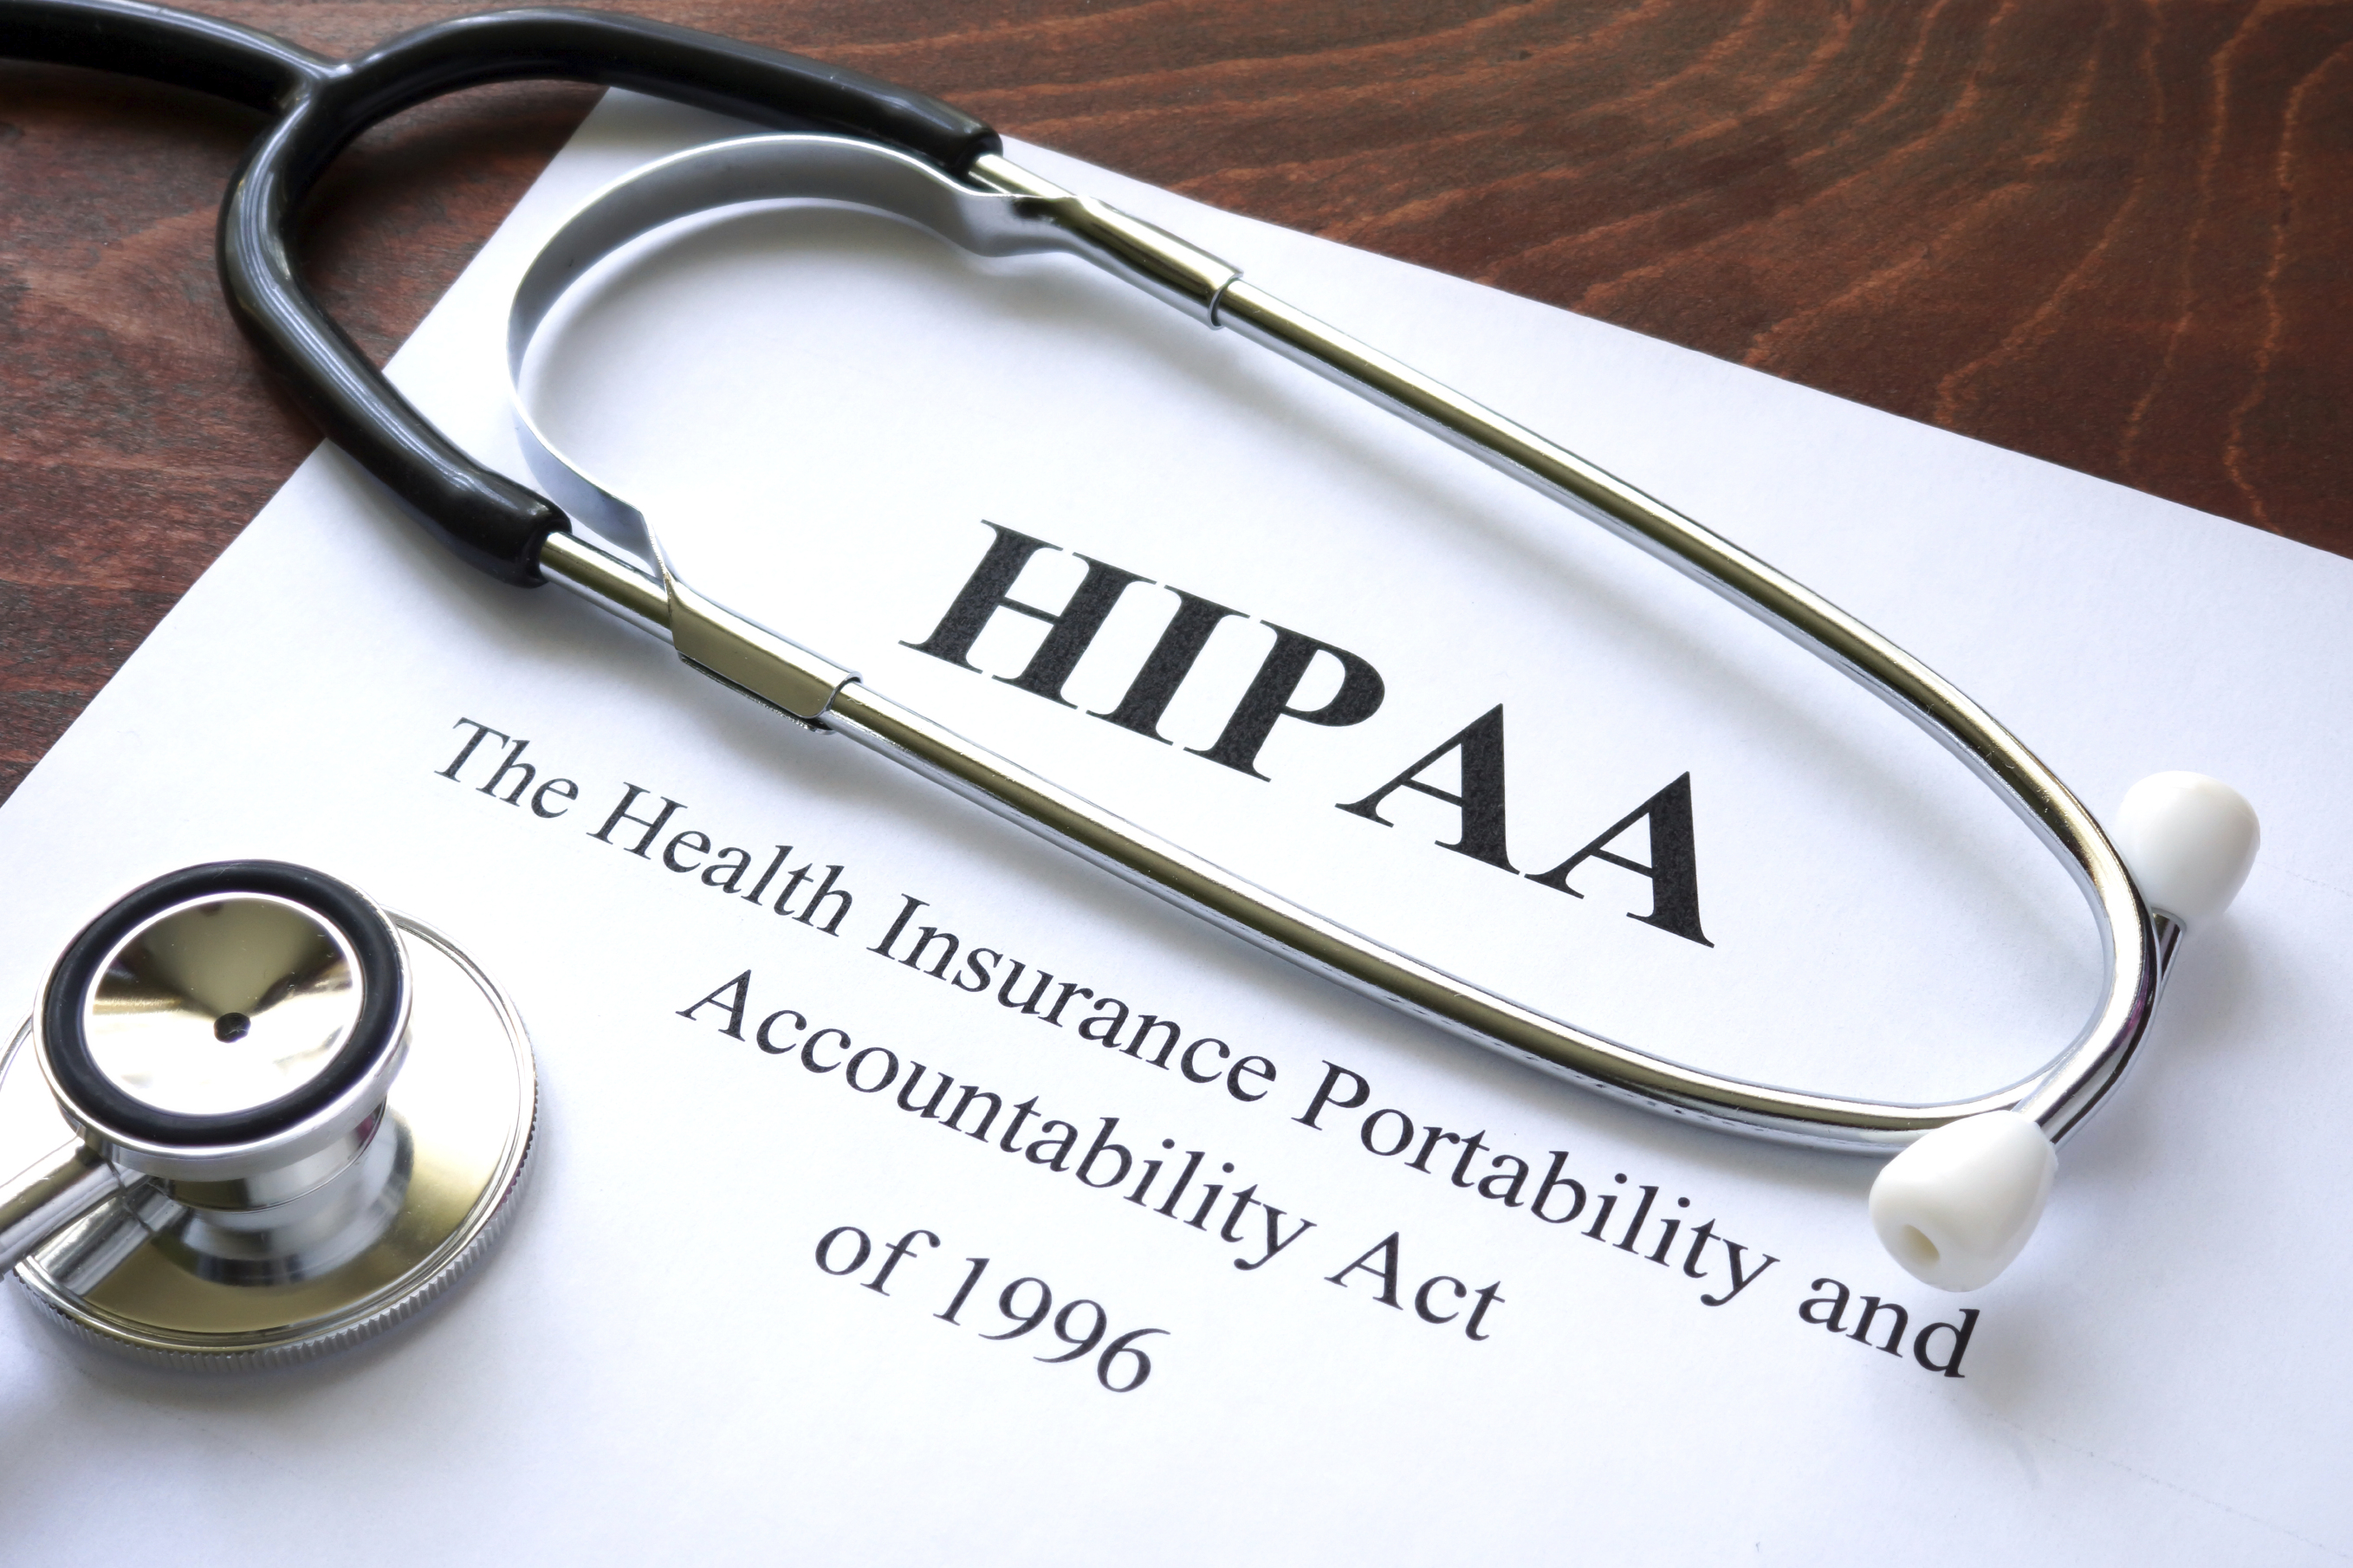 What could HIPAA violation cost your practice?